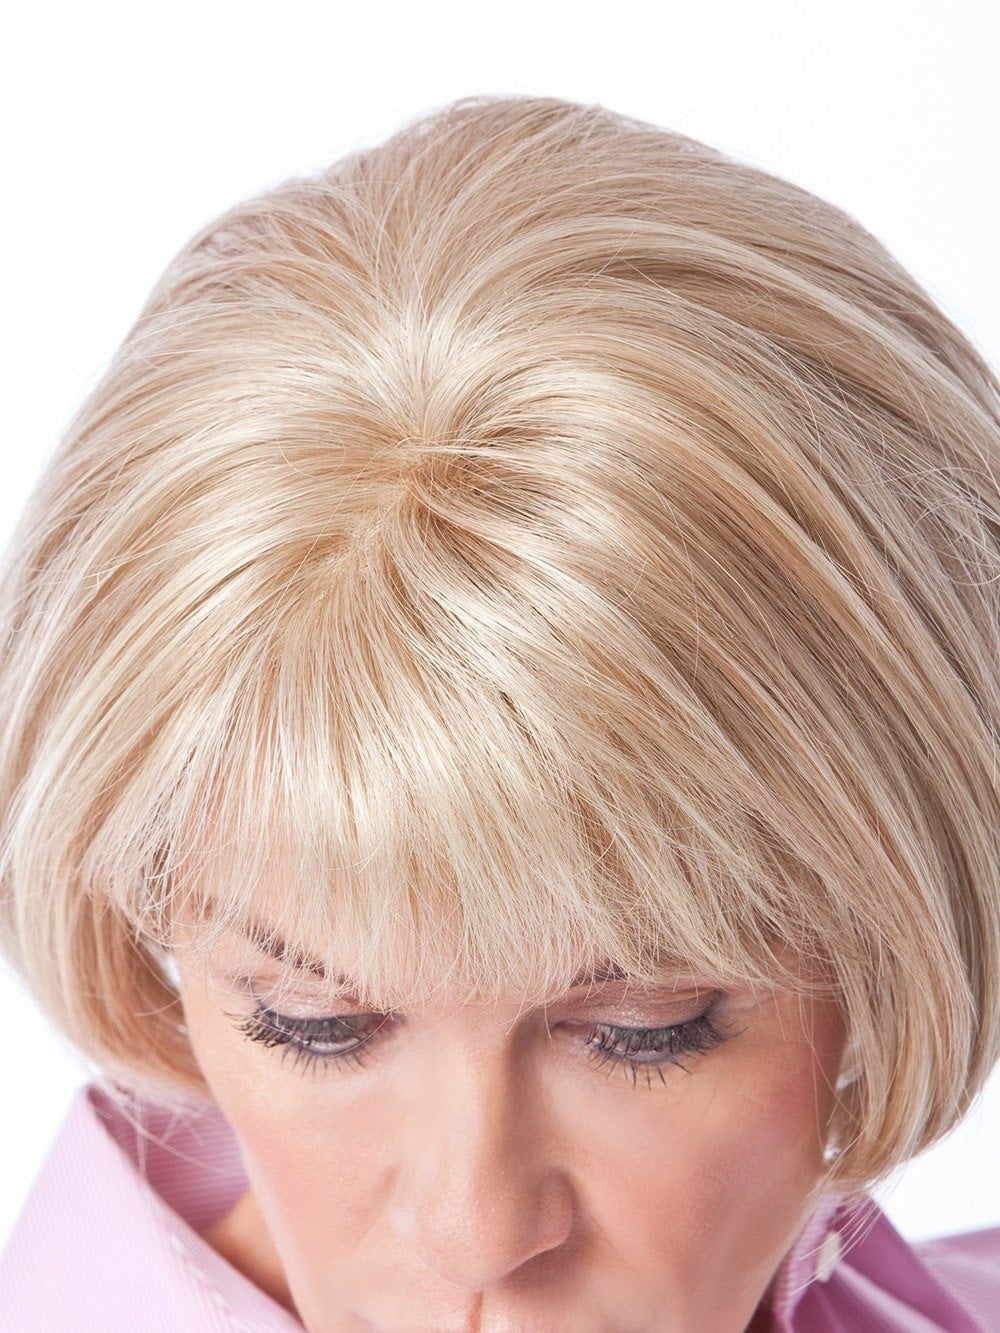 Transparent Monofilament Crown Piece for Limitless Hair Styling Versatility